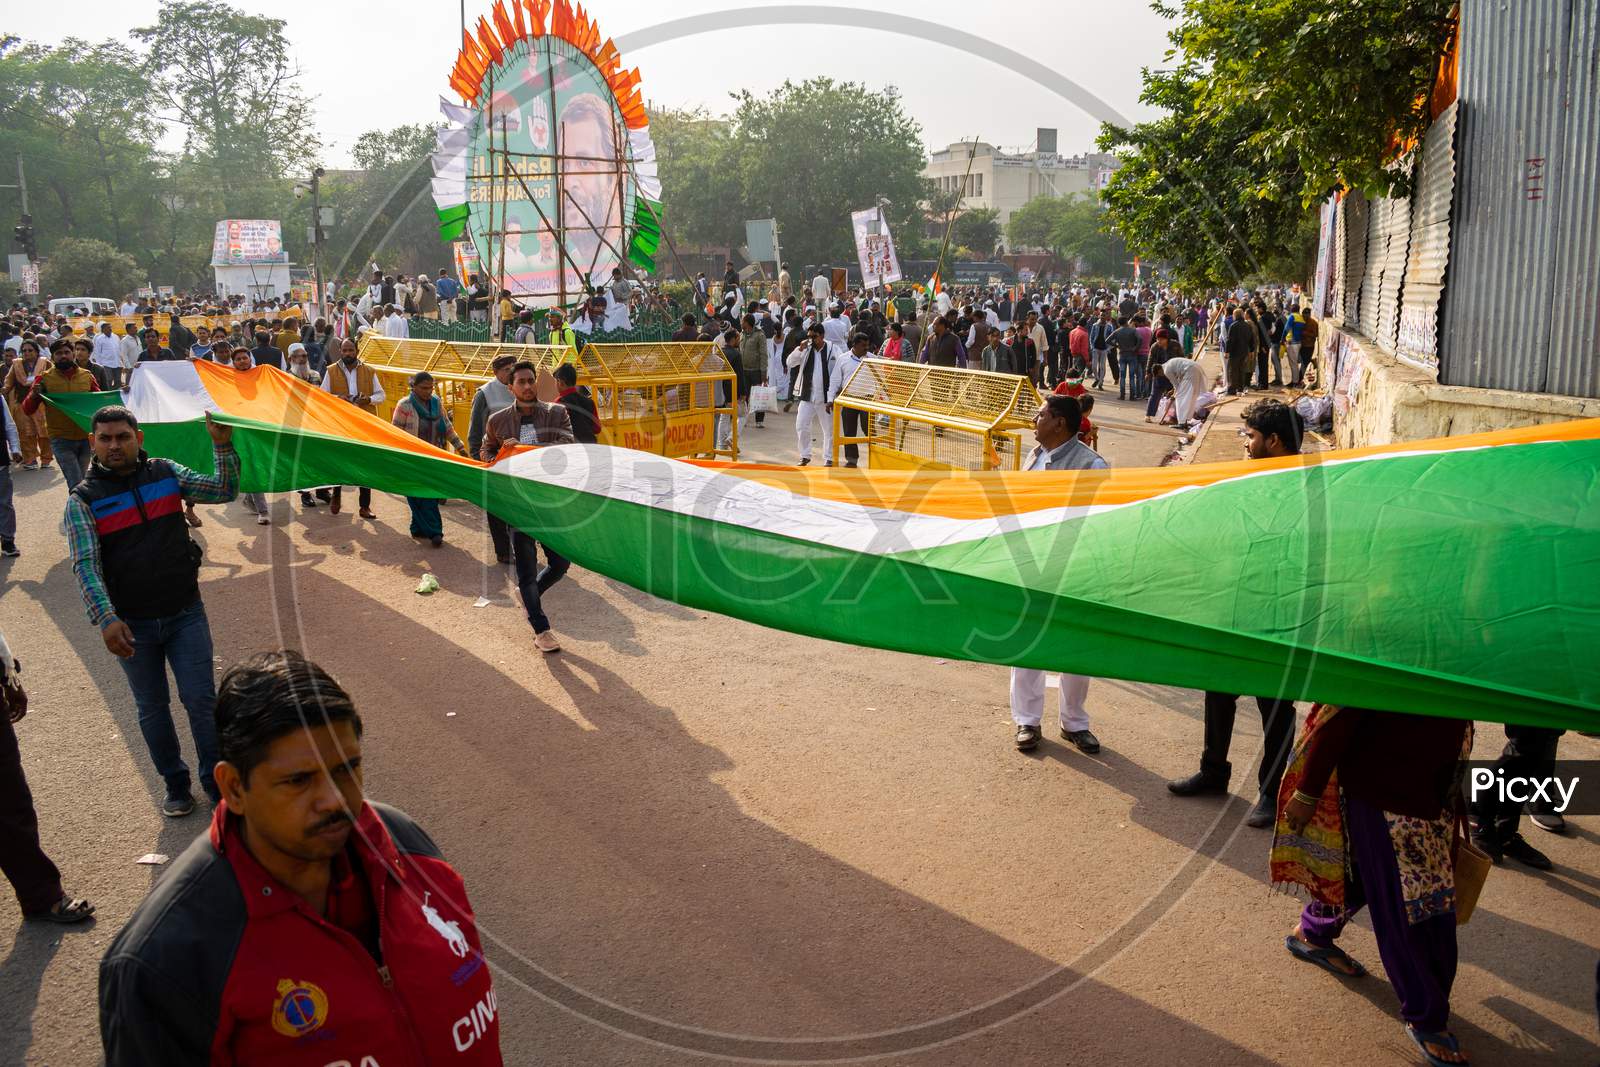 Congress workers carrying Indian flag during 'Bharat Bachao' rally by Congress in Delhi to highlight Modi govt failures